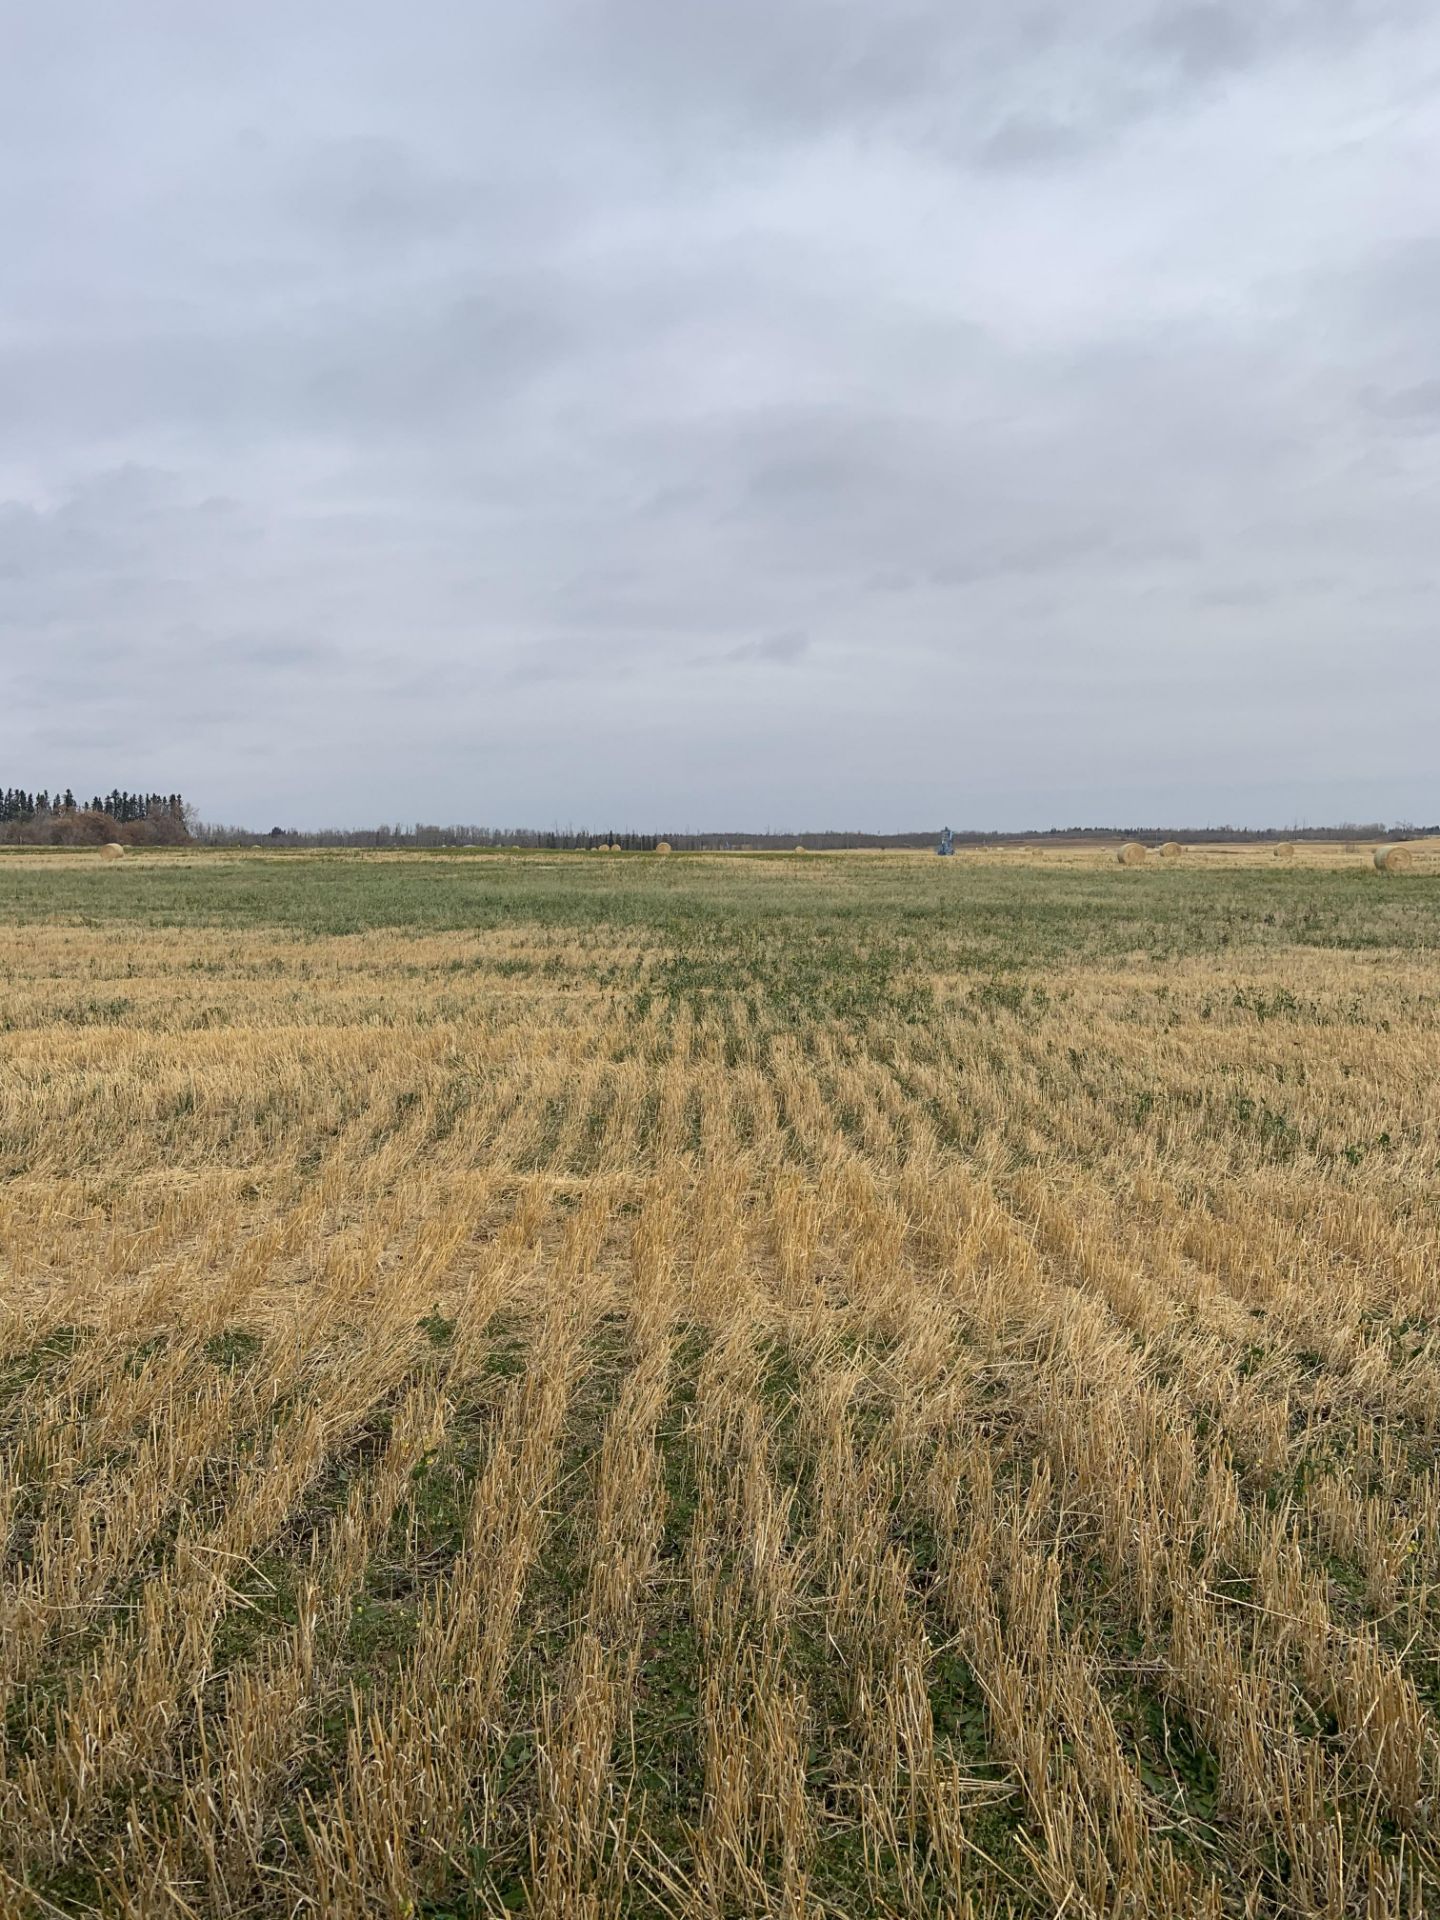 160+/- Total Acres NW 8-56-20-W4, Bruderheim, AB, consisting of Crop Land, Surface Lease & Yard Site - Image 31 of 34